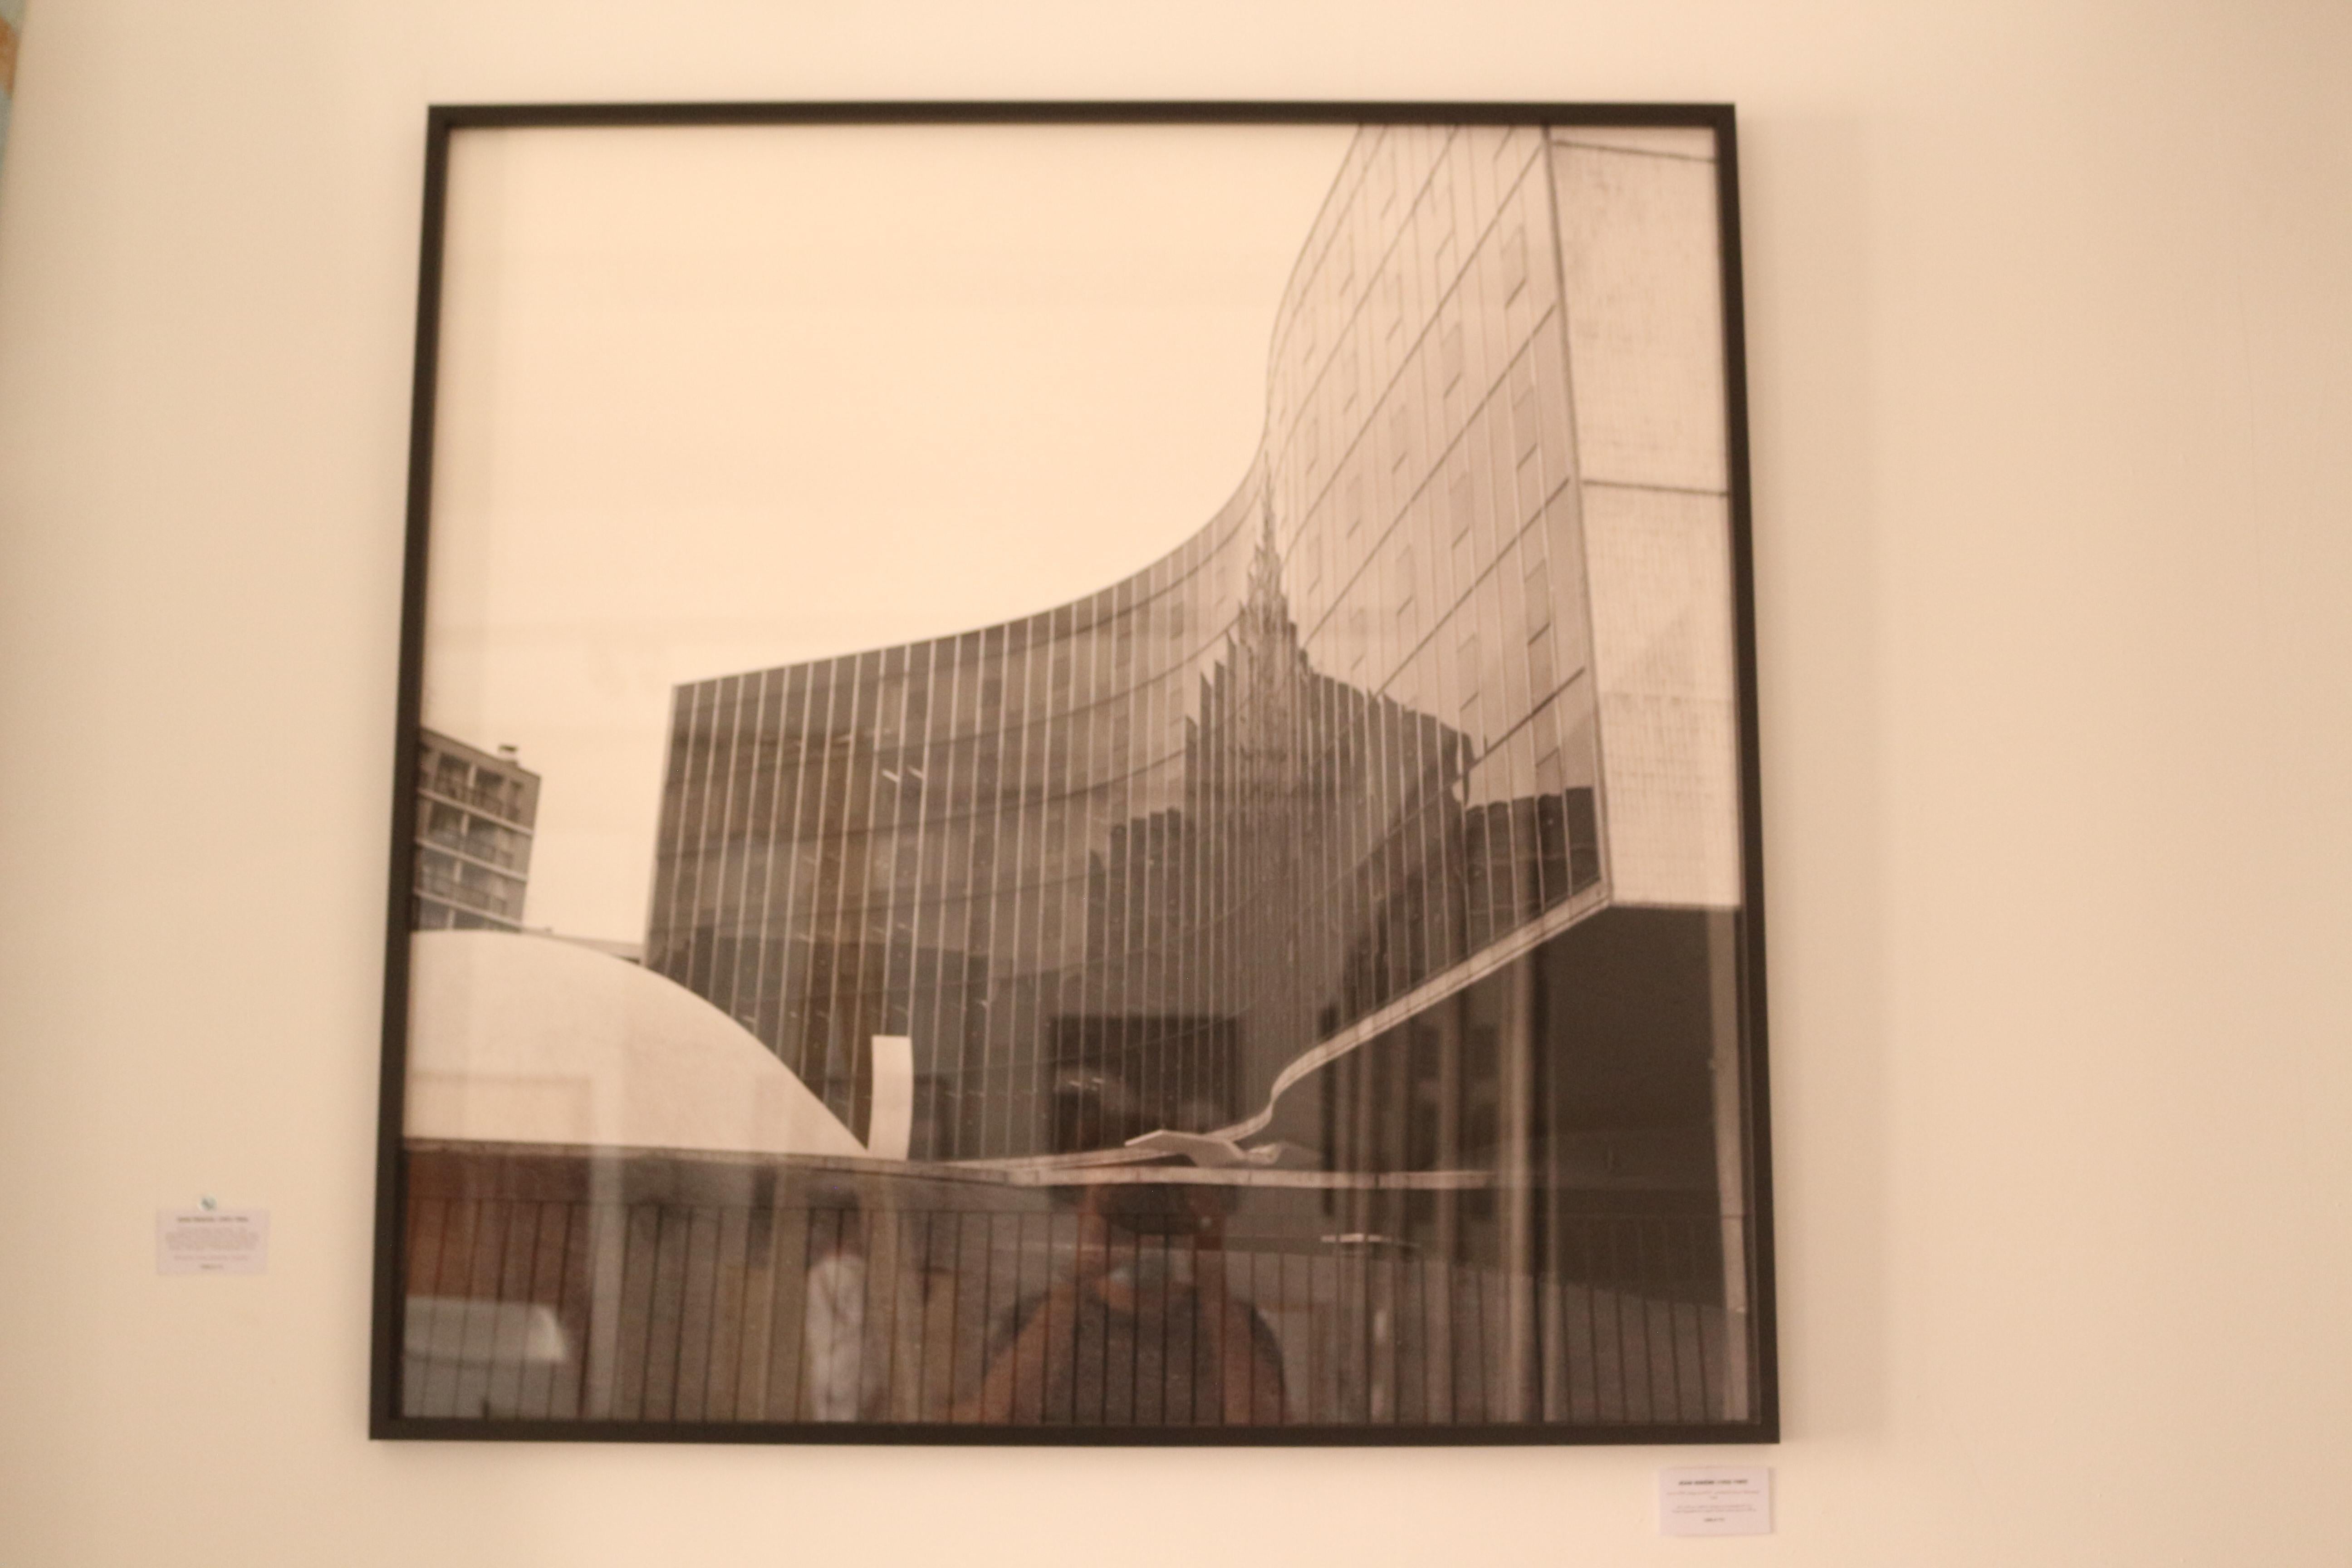 PCF headquarters - architect Oscar Niemeyer, Paris, circa 1970.

Size: 100 x 100 cm / limited and numbered edition n°1/12
Digigraphy print on textured cotton fine art paper 320 gr.  

Certification: Signed and numbered by hand.

Frame: Black